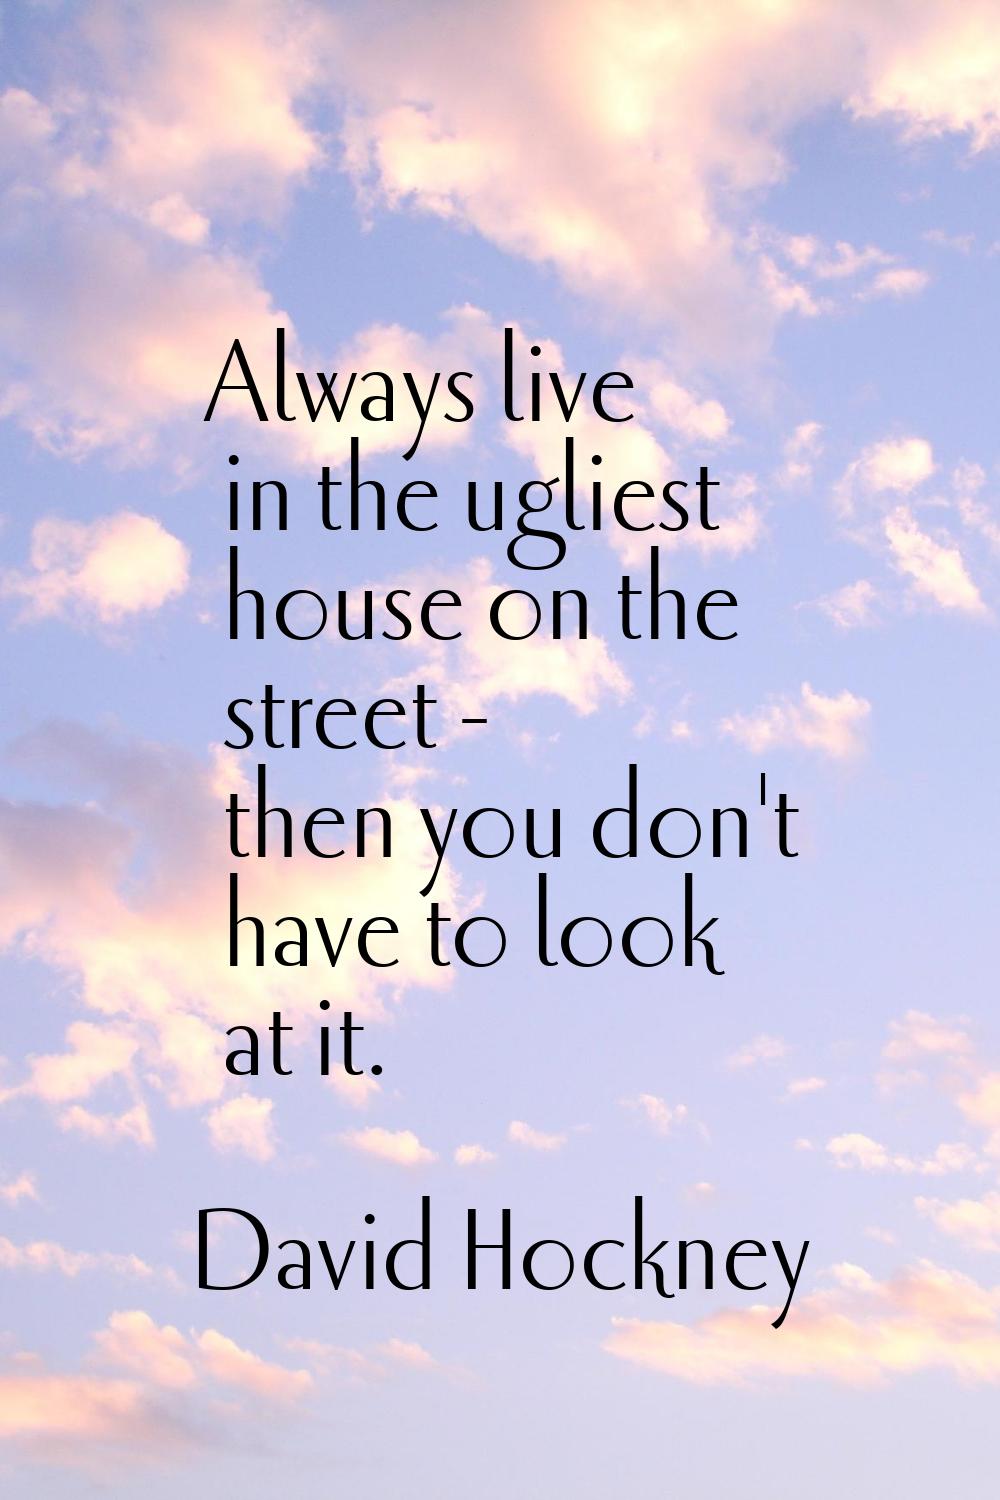 Always live in the ugliest house on the street - then you don't have to look at it.